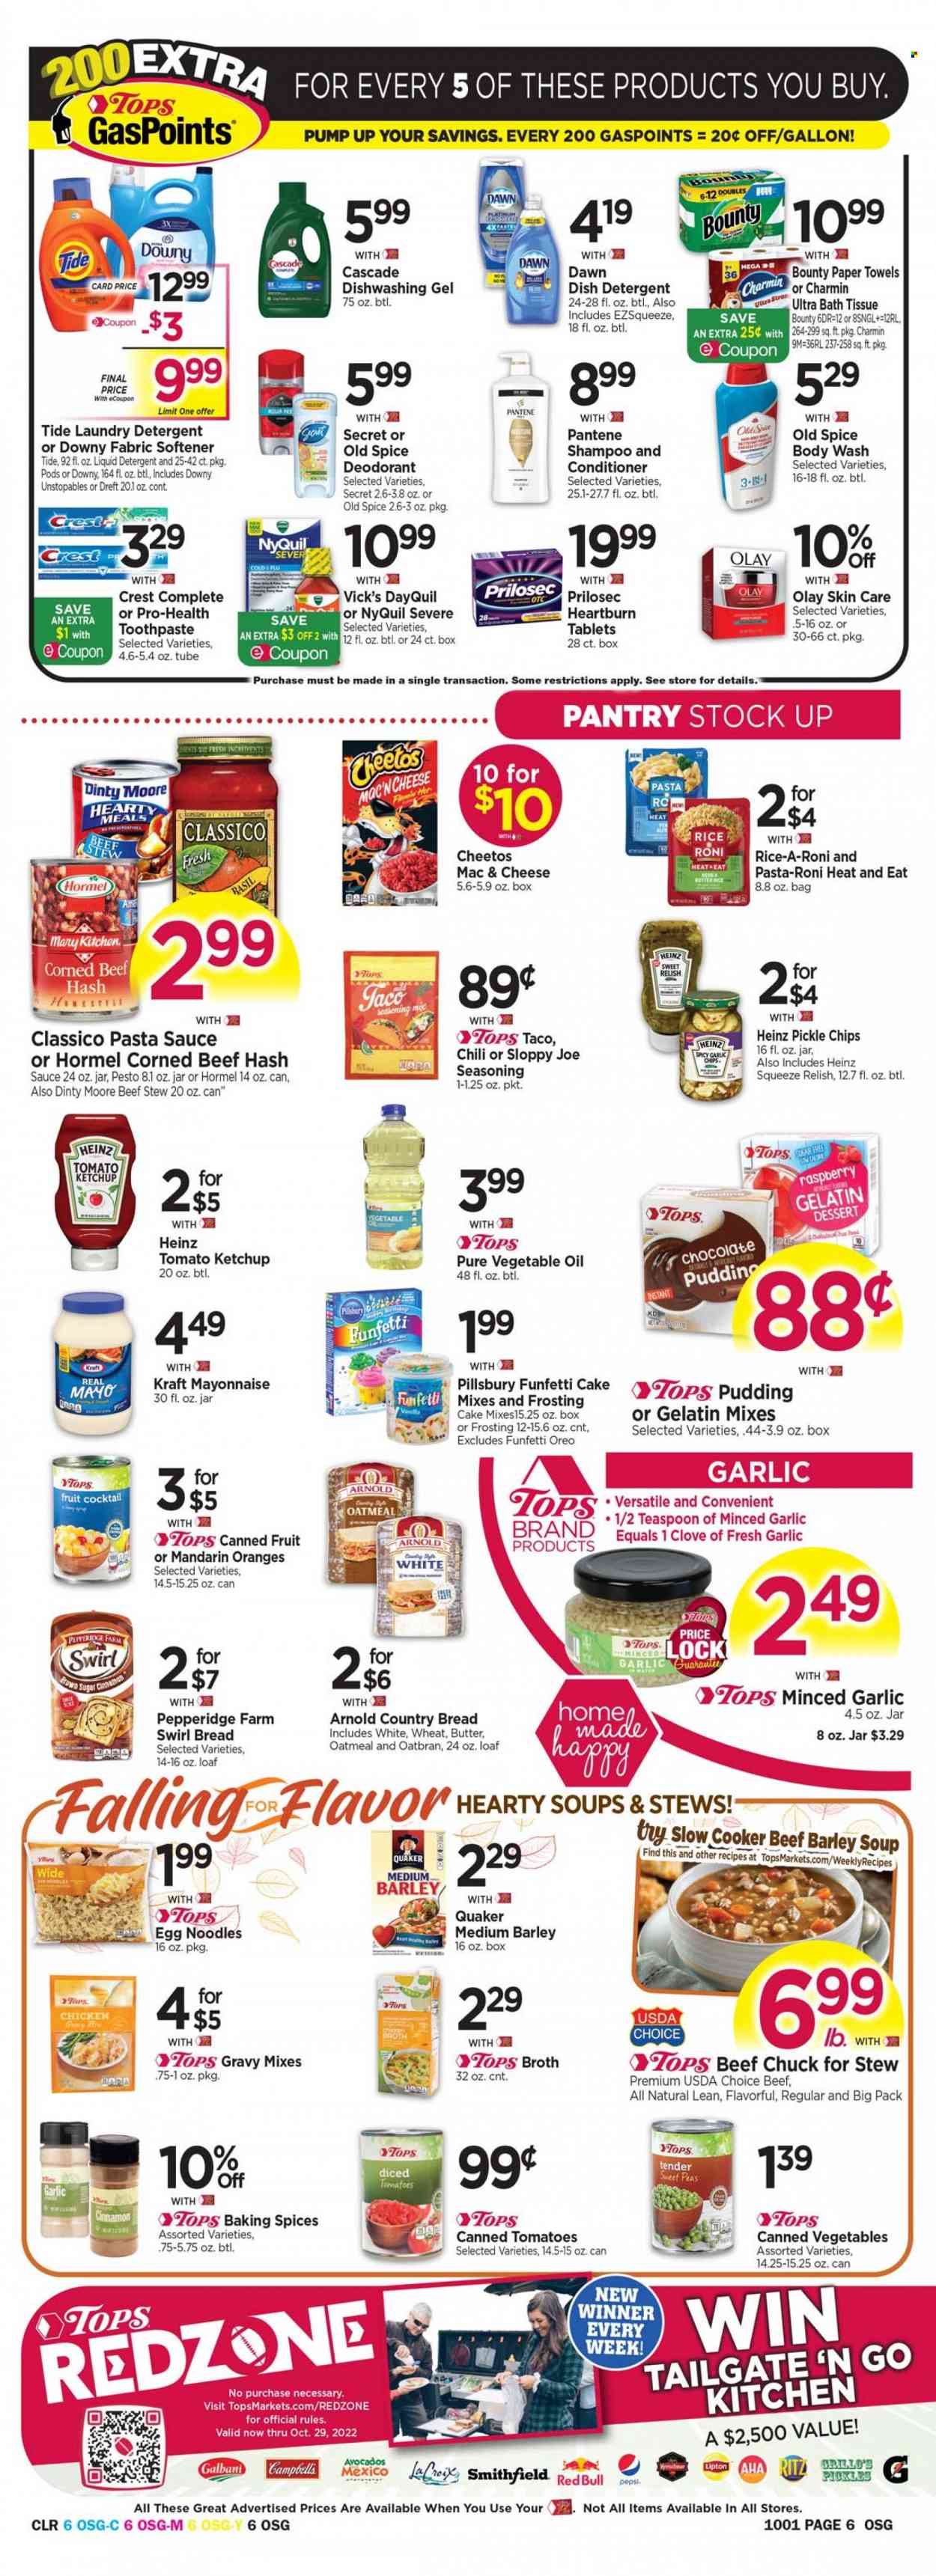 thumbnail - Tops Flyer - 09/25/2022 - 10/01/2022 - Sales products - cake, tomatoes, avocado, mandarines, oranges, beef hash, Campbell's, pasta sauce, soup, Pillsbury, Quaker, noodles, Kraft®, Hormel, corned beef, Galbani, pudding, Oreo, chocolate pudding, butter, mayonnaise, chocolate, Bounty, RITZ, Cheetos, chips, frosting, chicken broth, oatmeal, broth, Heinz, pickles, canned vegetables, canned fruit, diced tomatoes, egg noodles, cloves, spice, cinnamon, ketchup, pesto, Classico, vegetable oil, oil, Pepsi, Red Bull, beef meat, bath tissue, kitchen towels, paper towels, Charmin, detergent, Cascade, Tide, Unstopables, fabric softener, liquid detergent, laundry detergent, Downy Laundry, dishwasher cleaner, body wash, shampoo, Old Spice, toothpaste, Crest, Olay, conditioner, Pantene. Page 6.